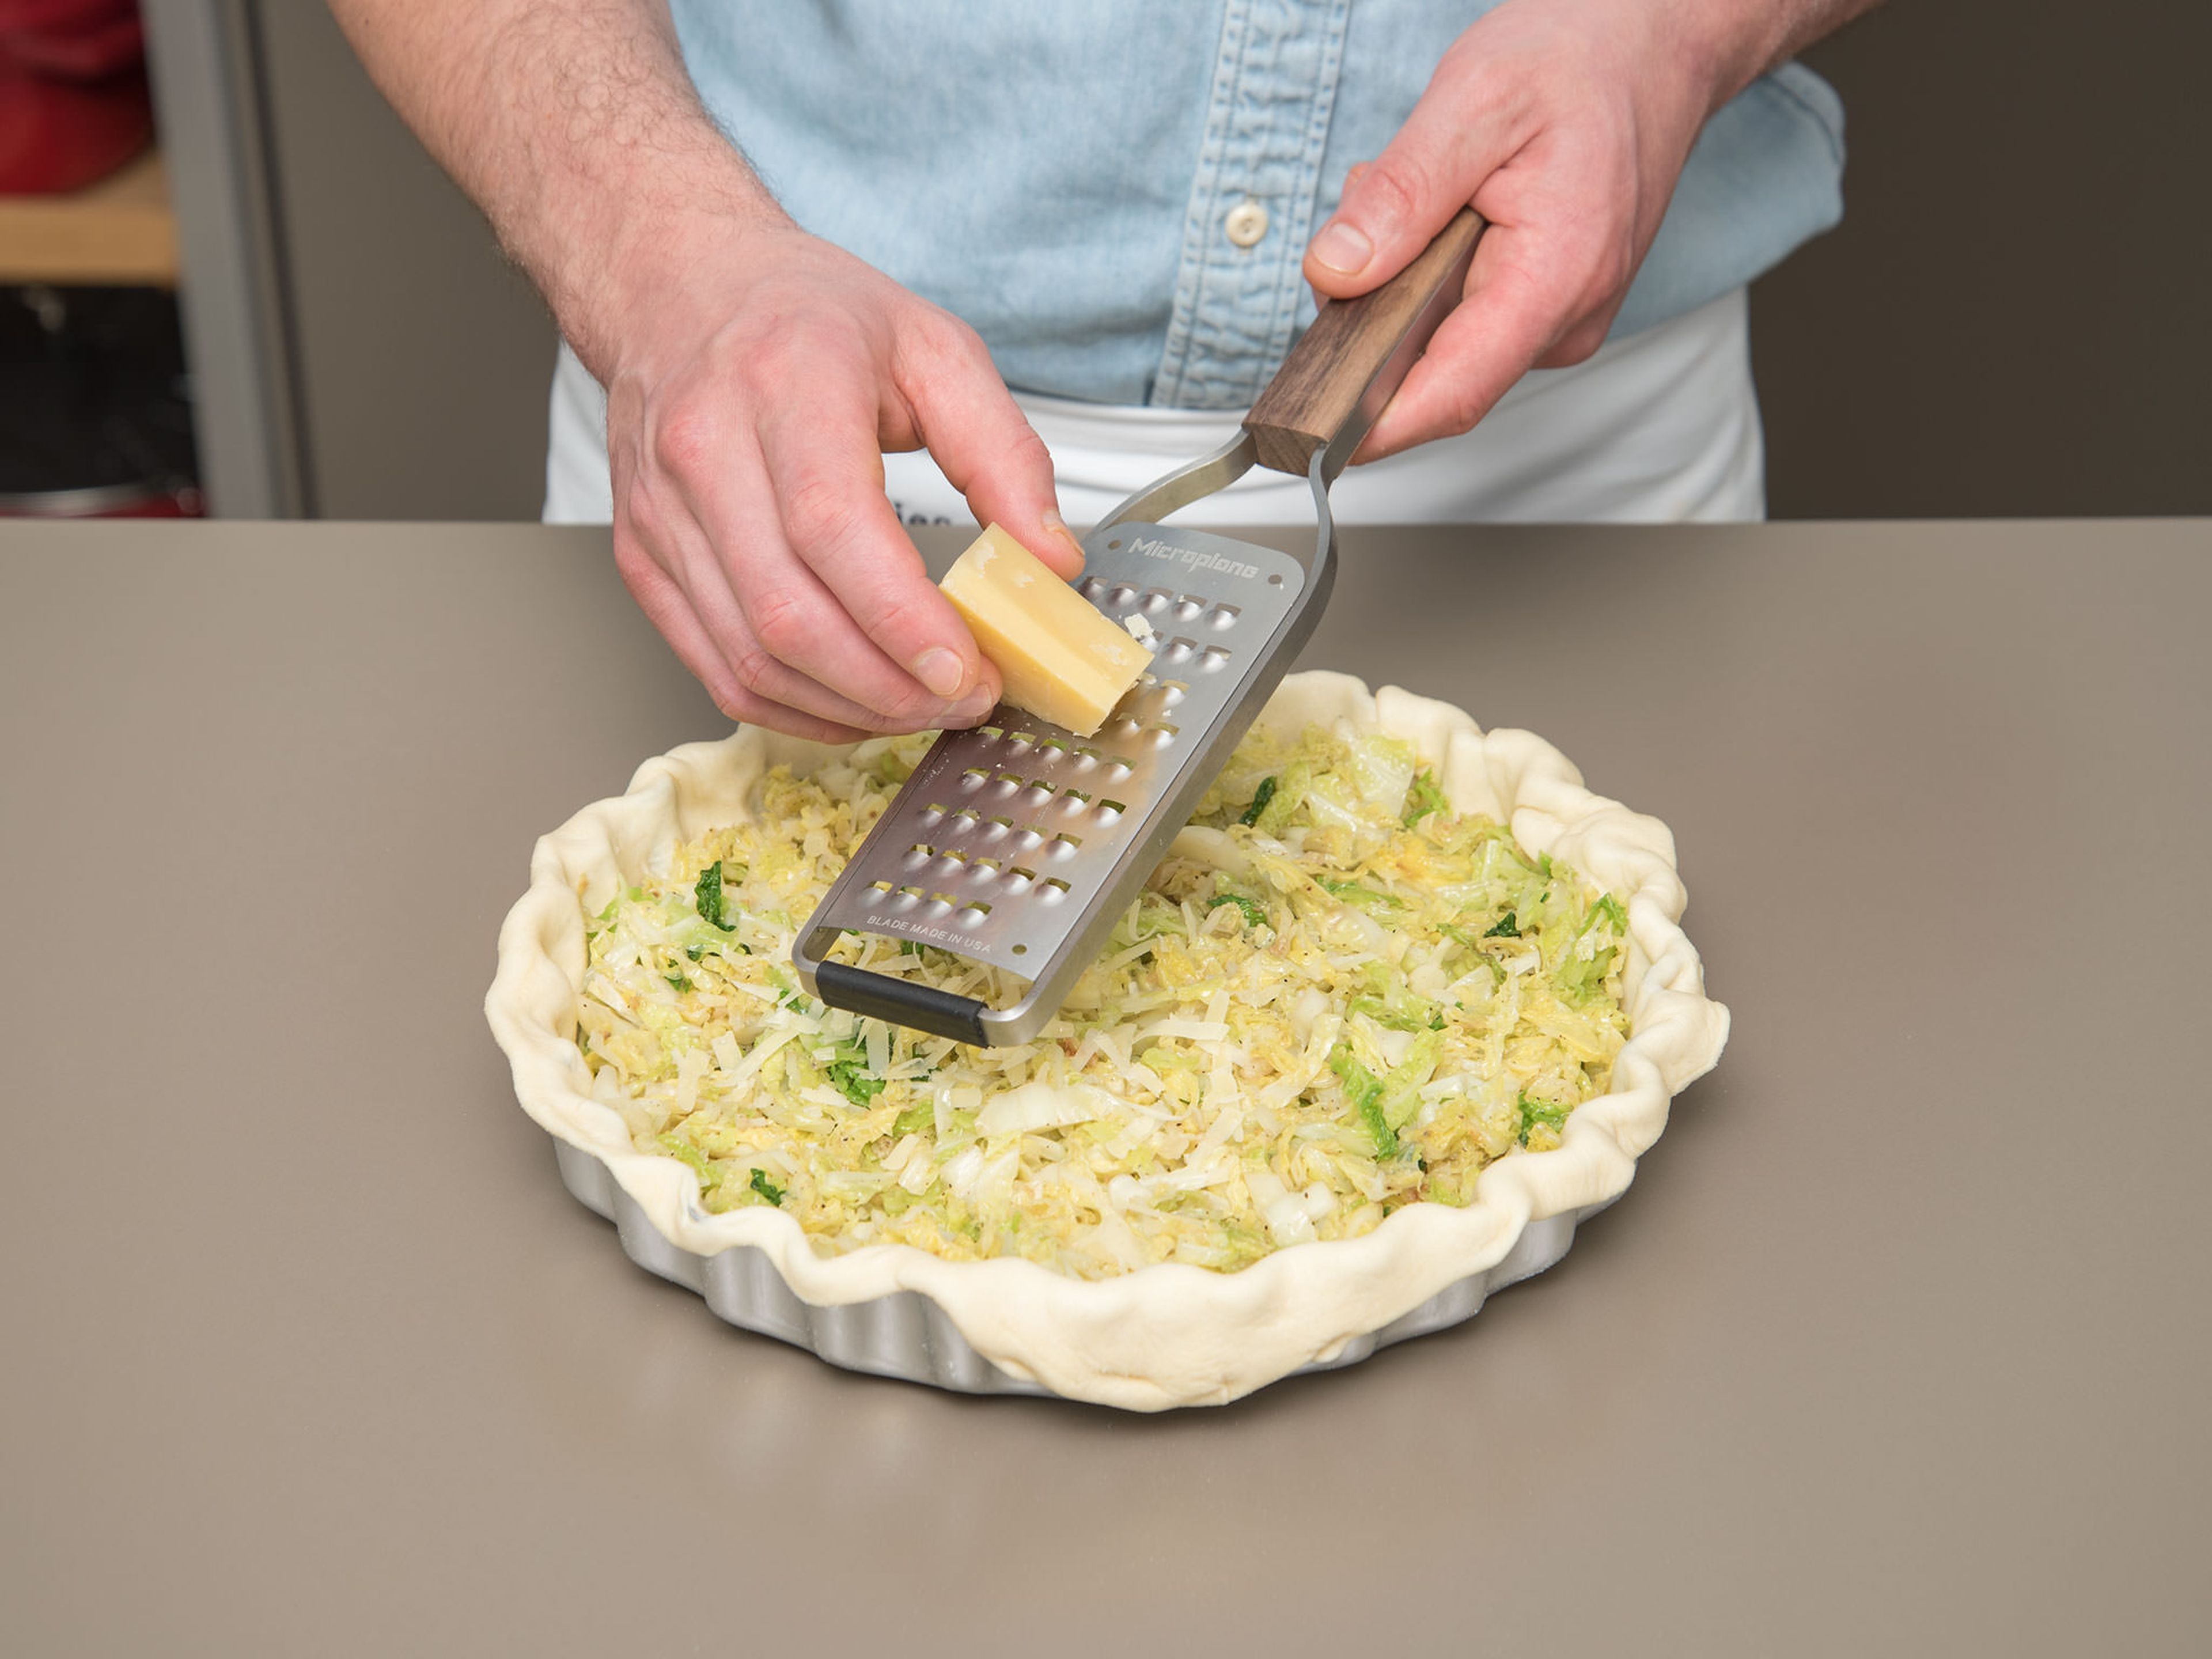 Thinly slice 2/3 of the Alpine cheese. Layer the bottom of the pan with cheese slices. Spread the cabbage over the dough so that it forms a small mound in the middle. Grate the rest of the cheese onto the cabbage.